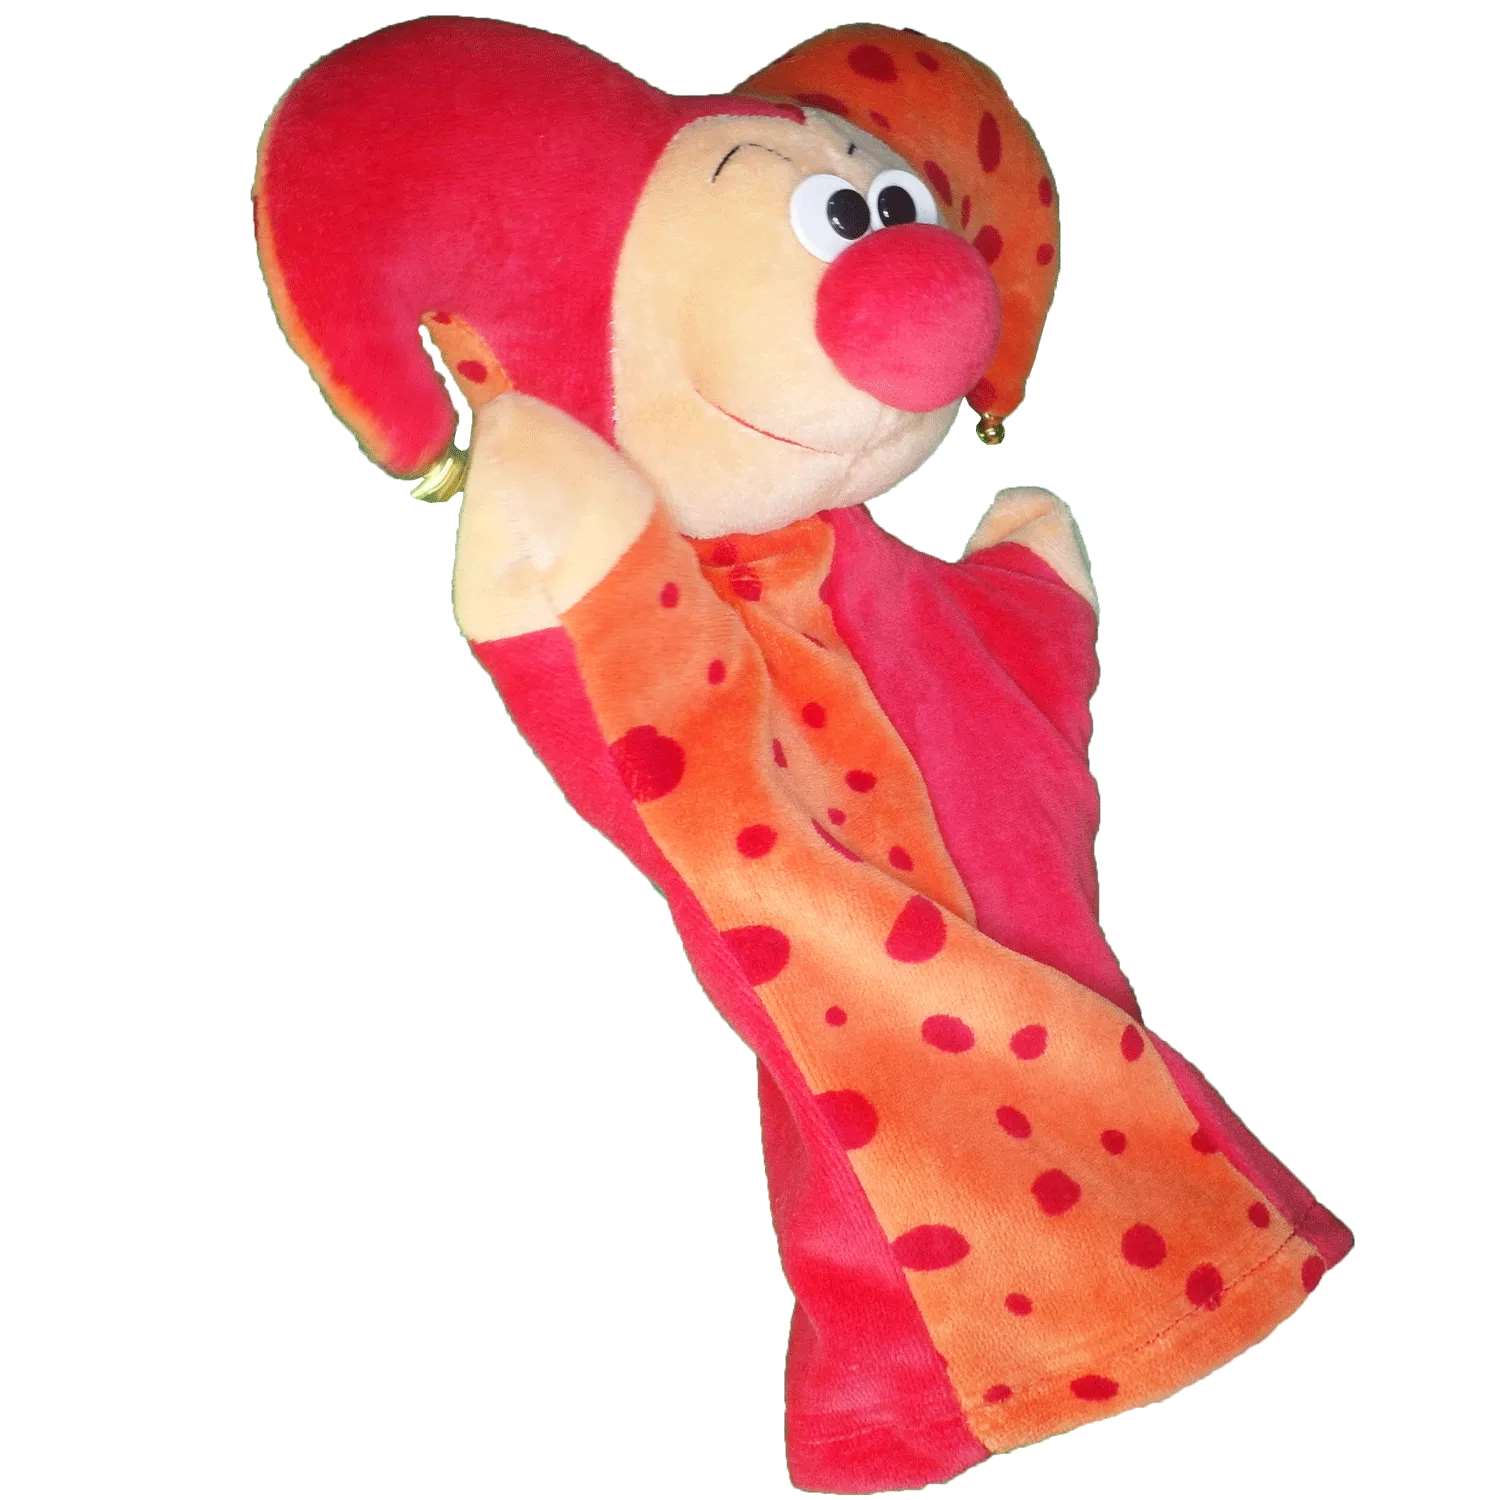 Hand puppet court jester red